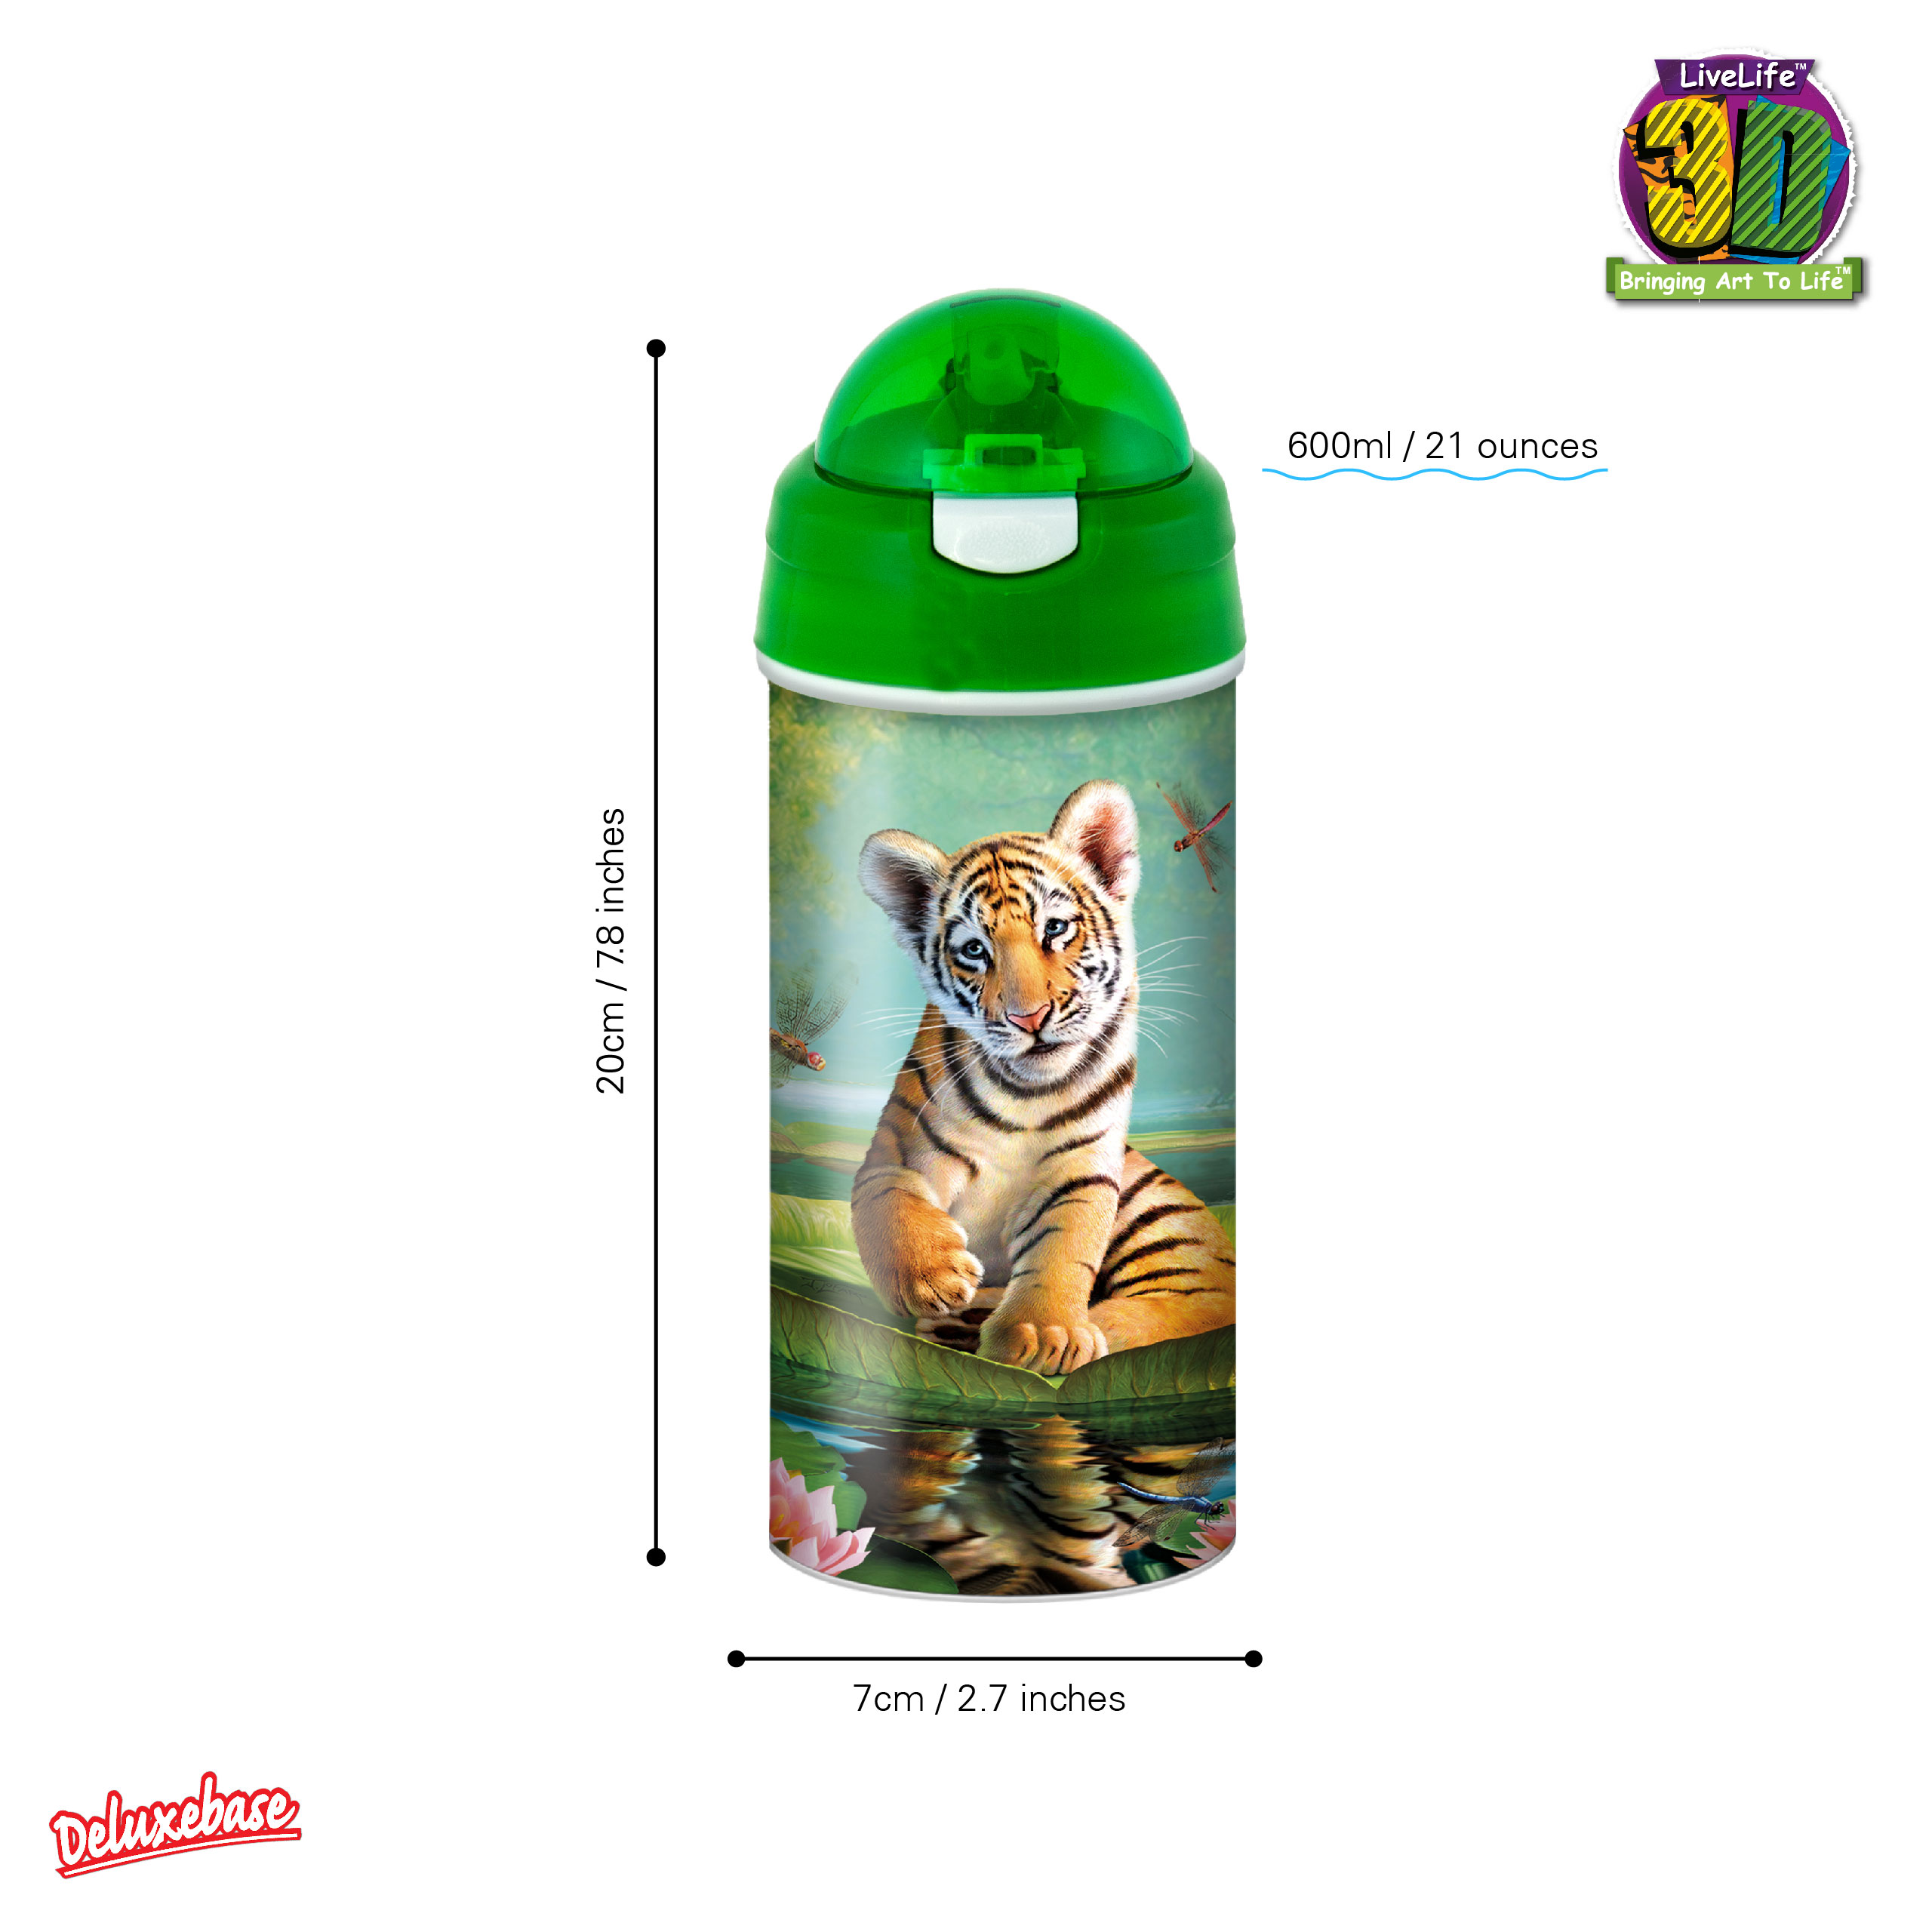 3D LiveLife Drinking Bottle - Tiger Lily from Deluxebase. 3D Lenticular Big Cat Water Bottle with Straw. 20oz kids water bottle with original artwork from renowned artist, Jerry LoFaro - image 2 of 2